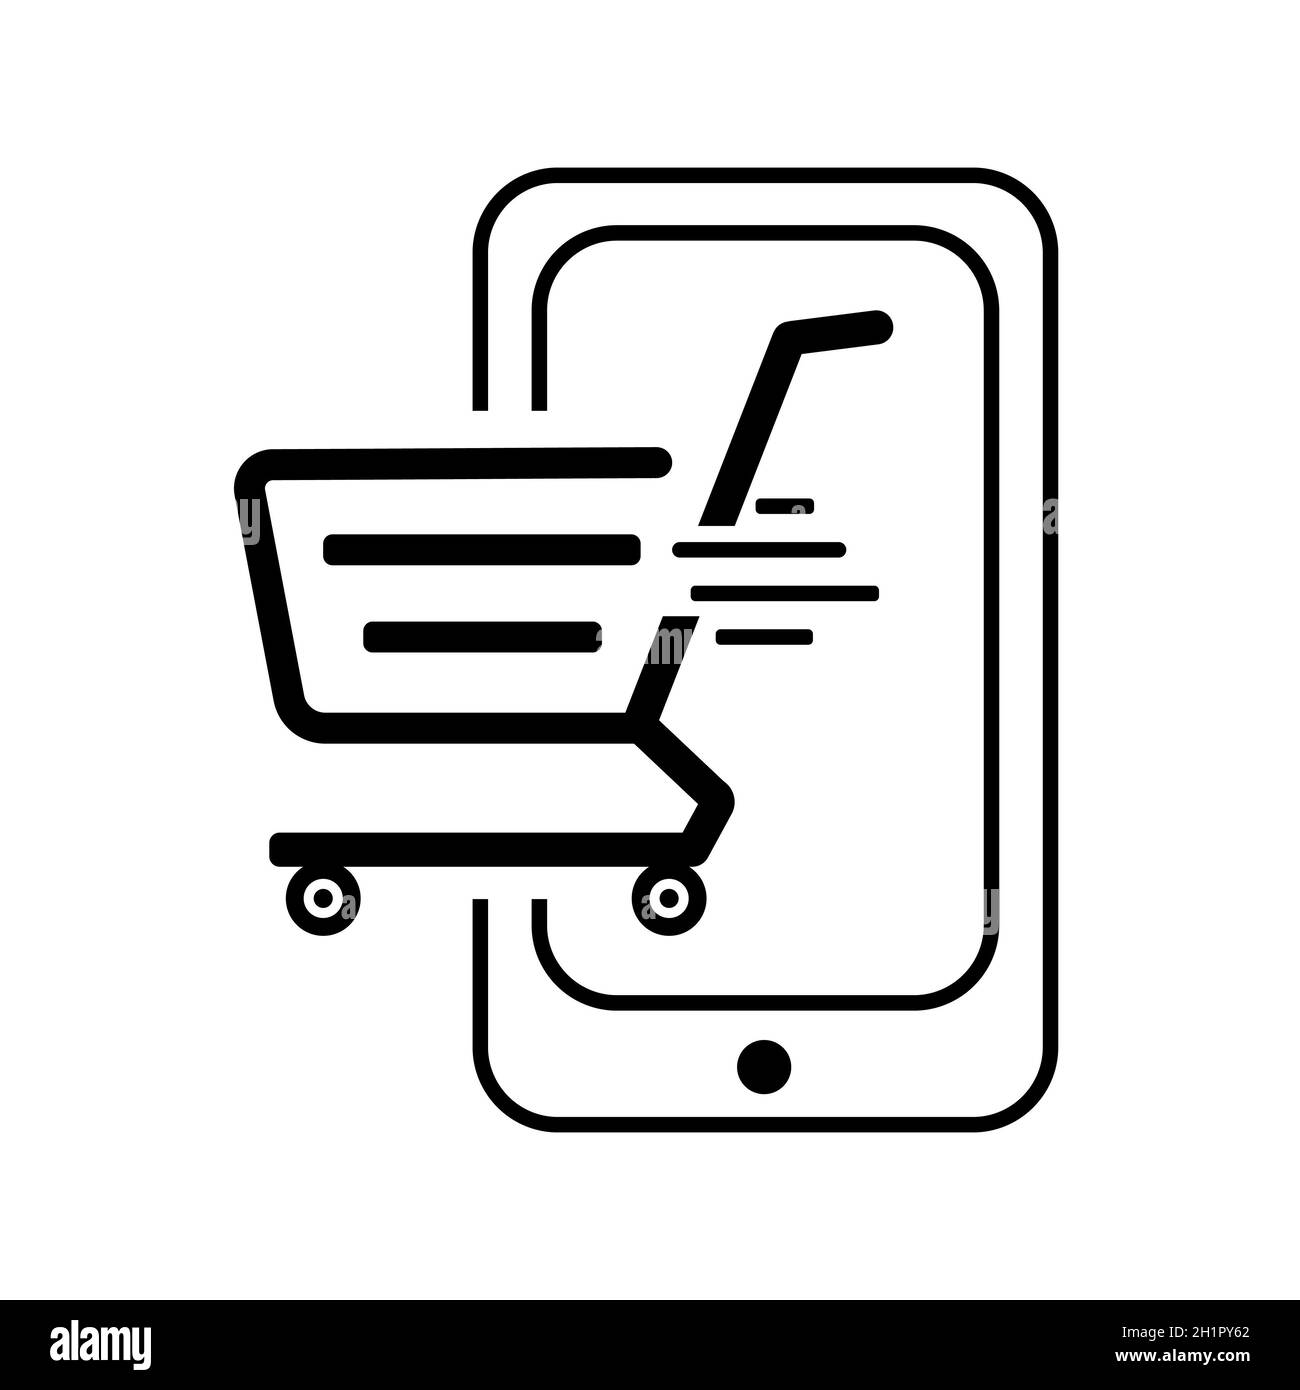 Abstract web icon grocery cart on wheels from supermarket - Vector illustration Stock Photo